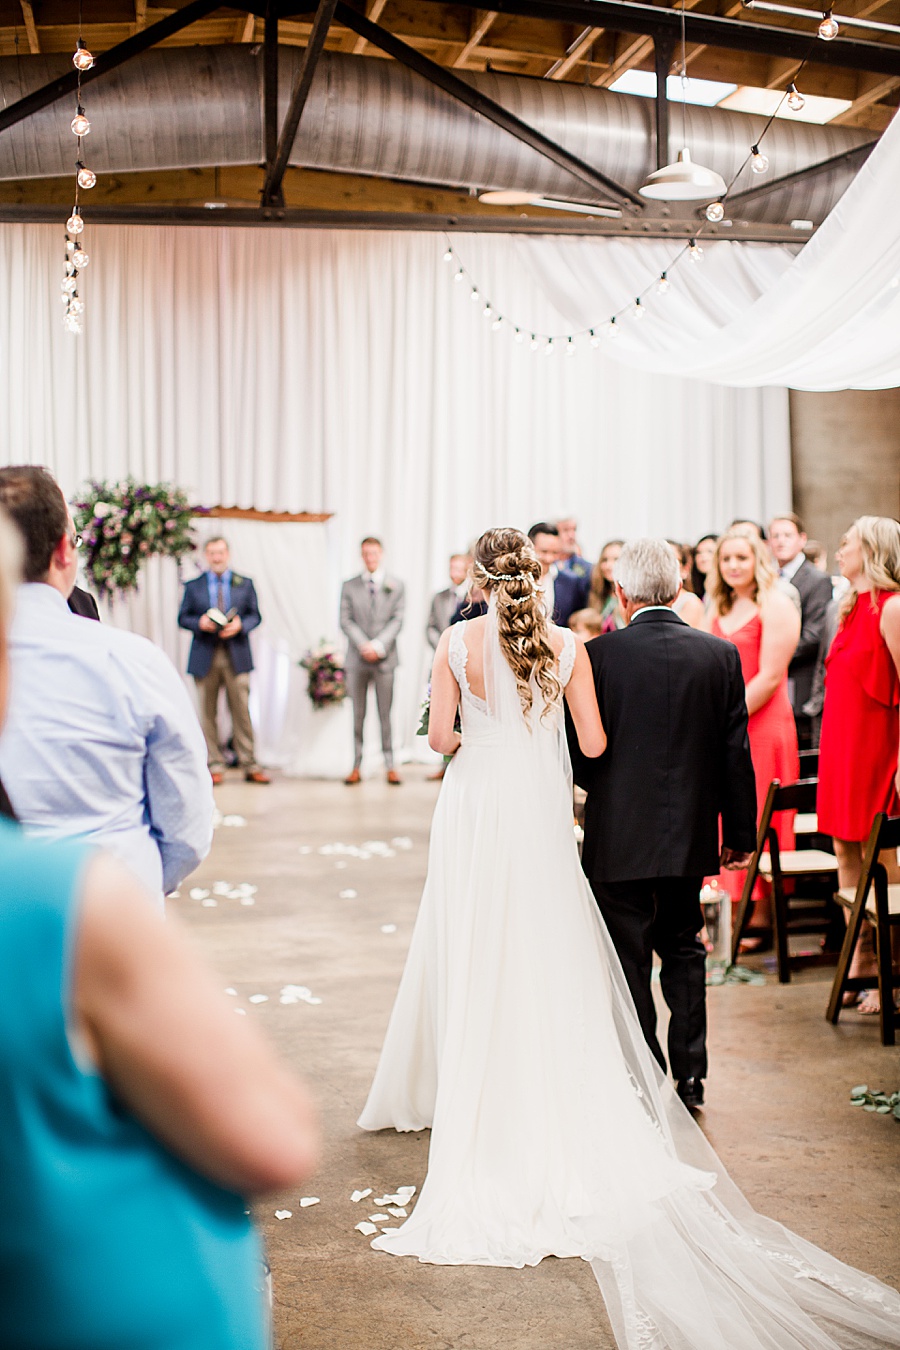 Walking down the aisle at this Wedding at The Standard by Knoxville Wedding Photographer, Amanda May Photos.